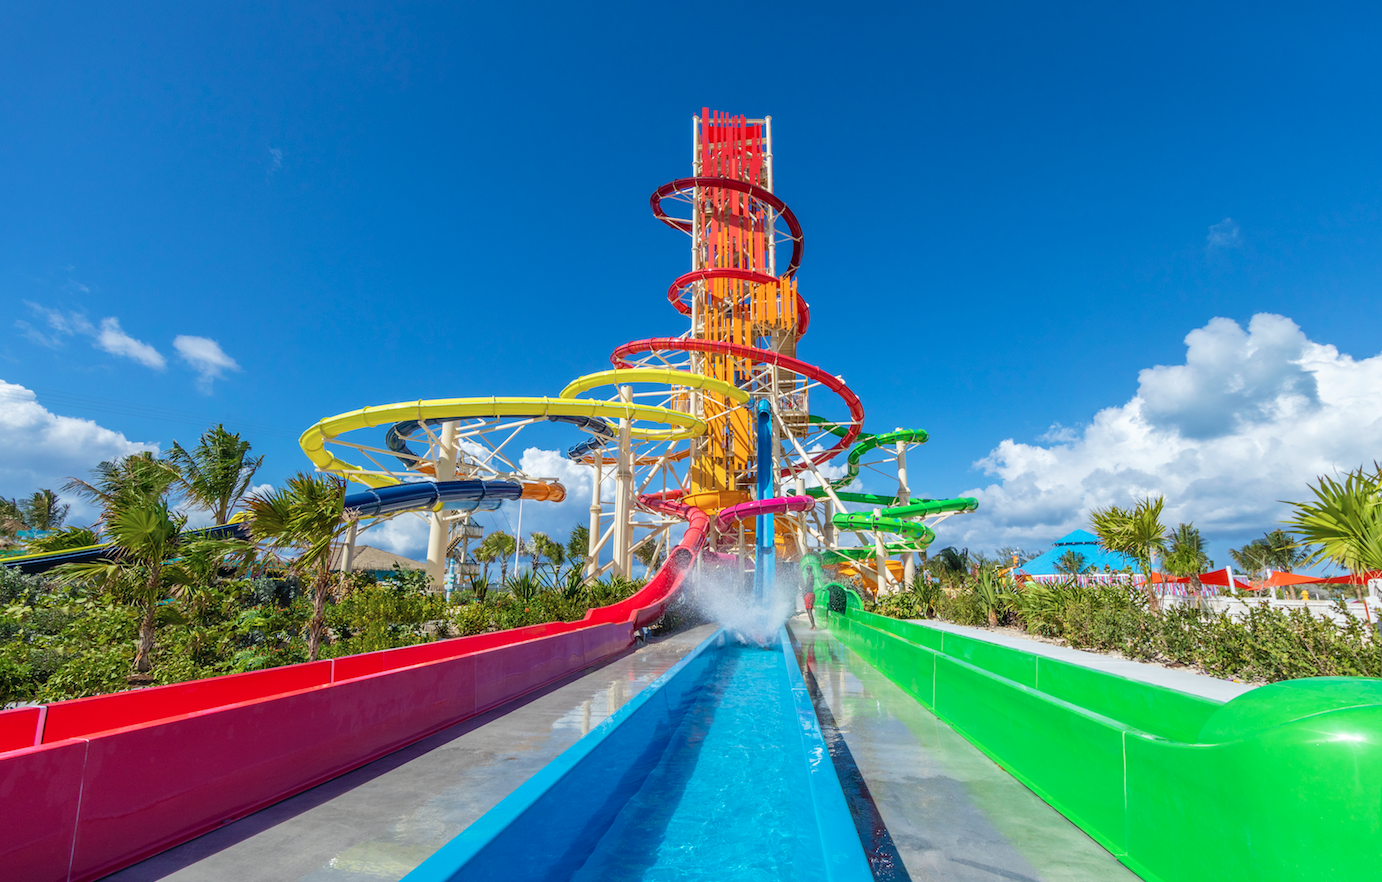 First Look: Unveiling the Tallest Waterslide in North America